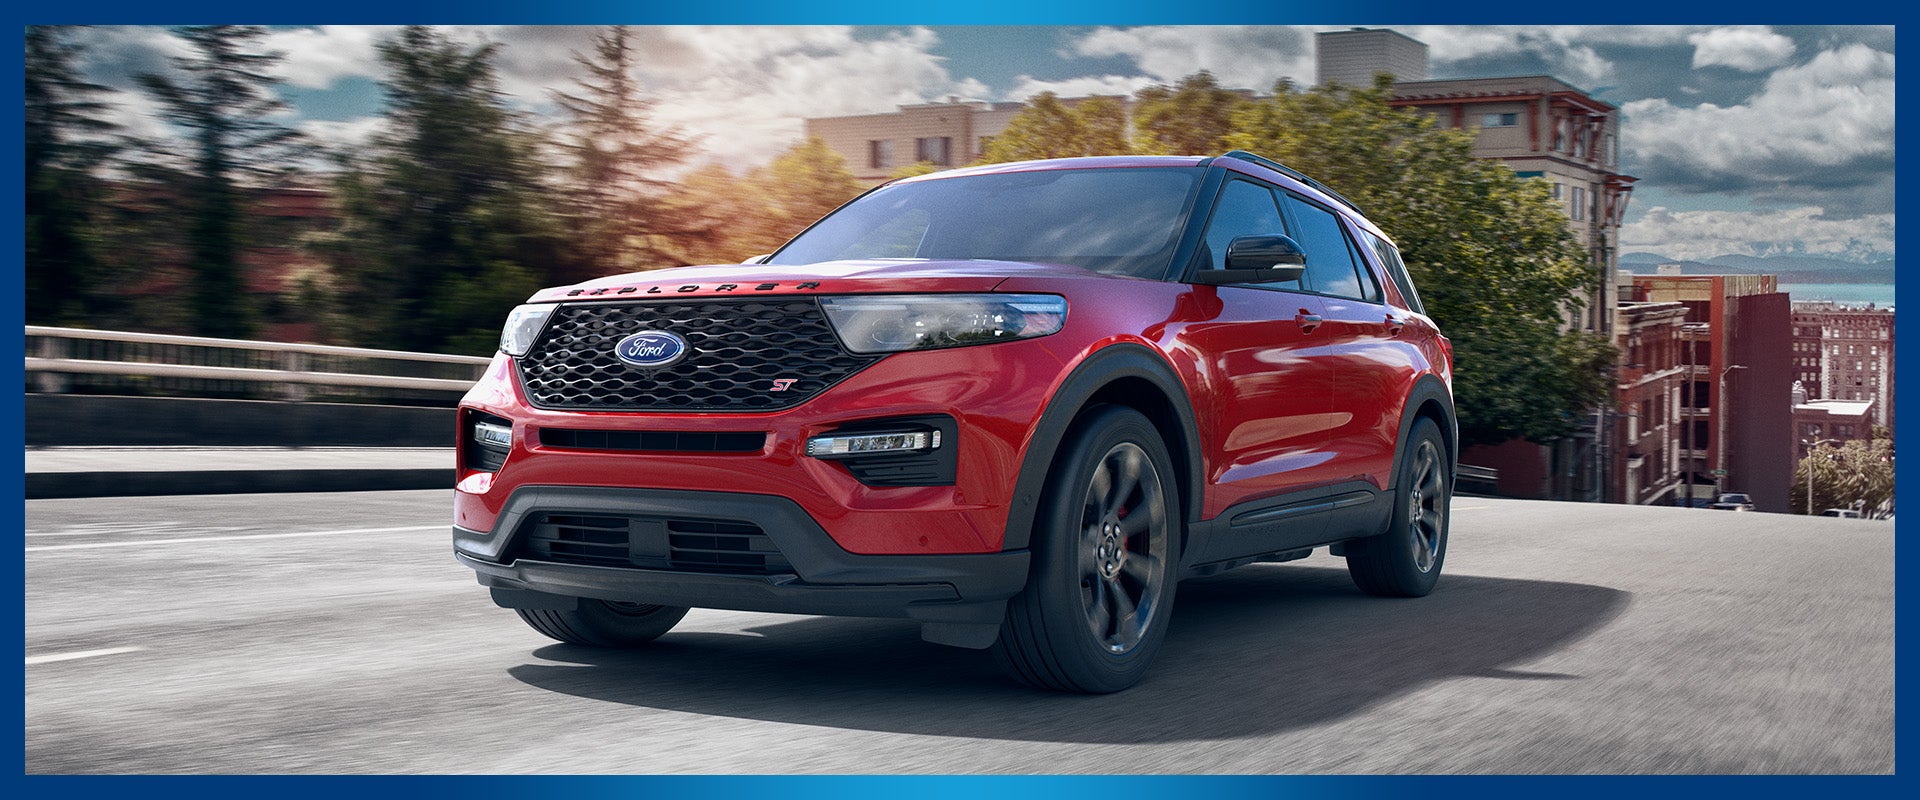 Ford SUV Towing Capacity Specs